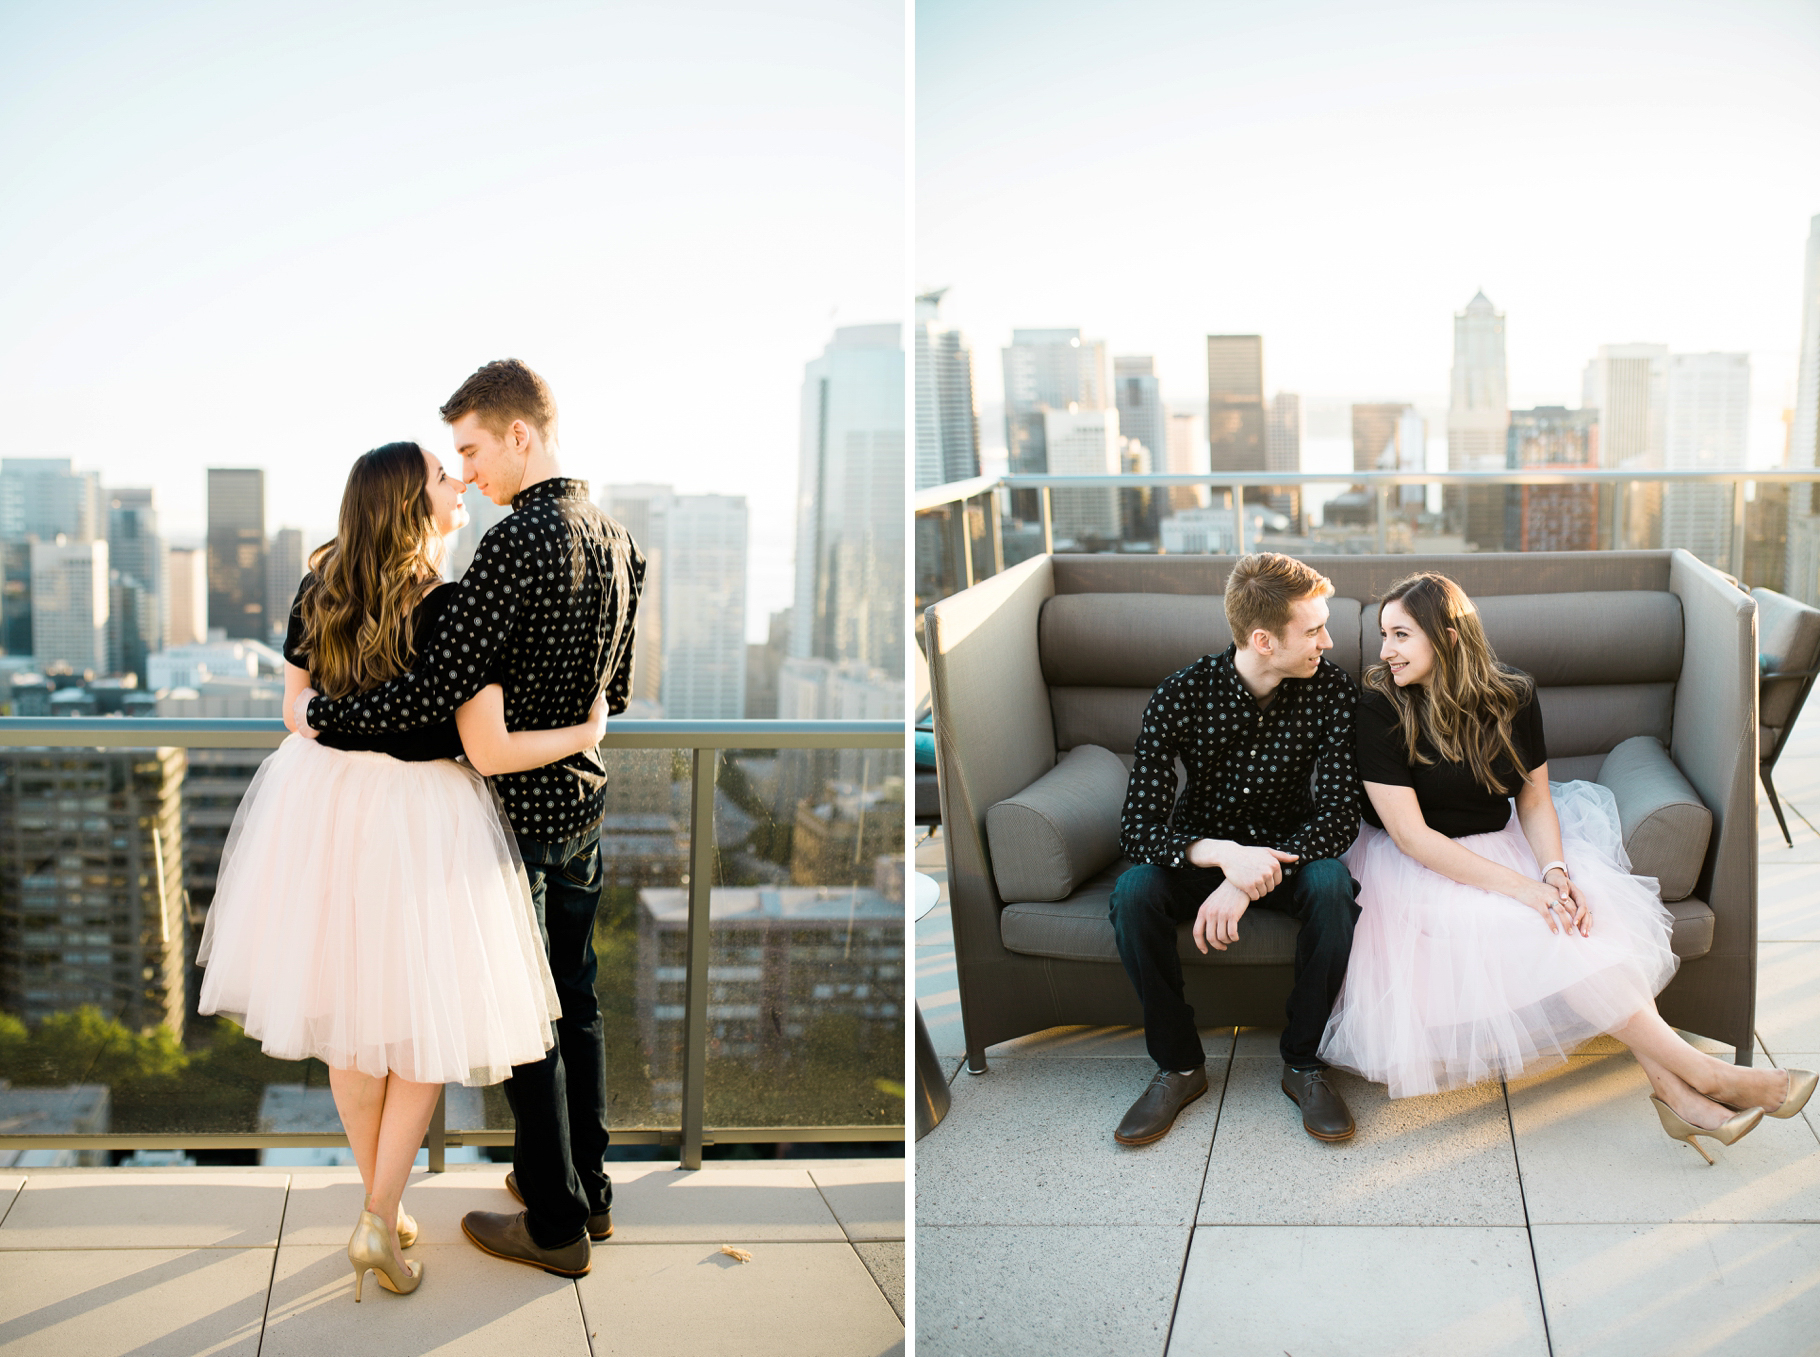 10-Capitol-Hill-rooftop-Engagement-Session-seattle-wedding-photographer